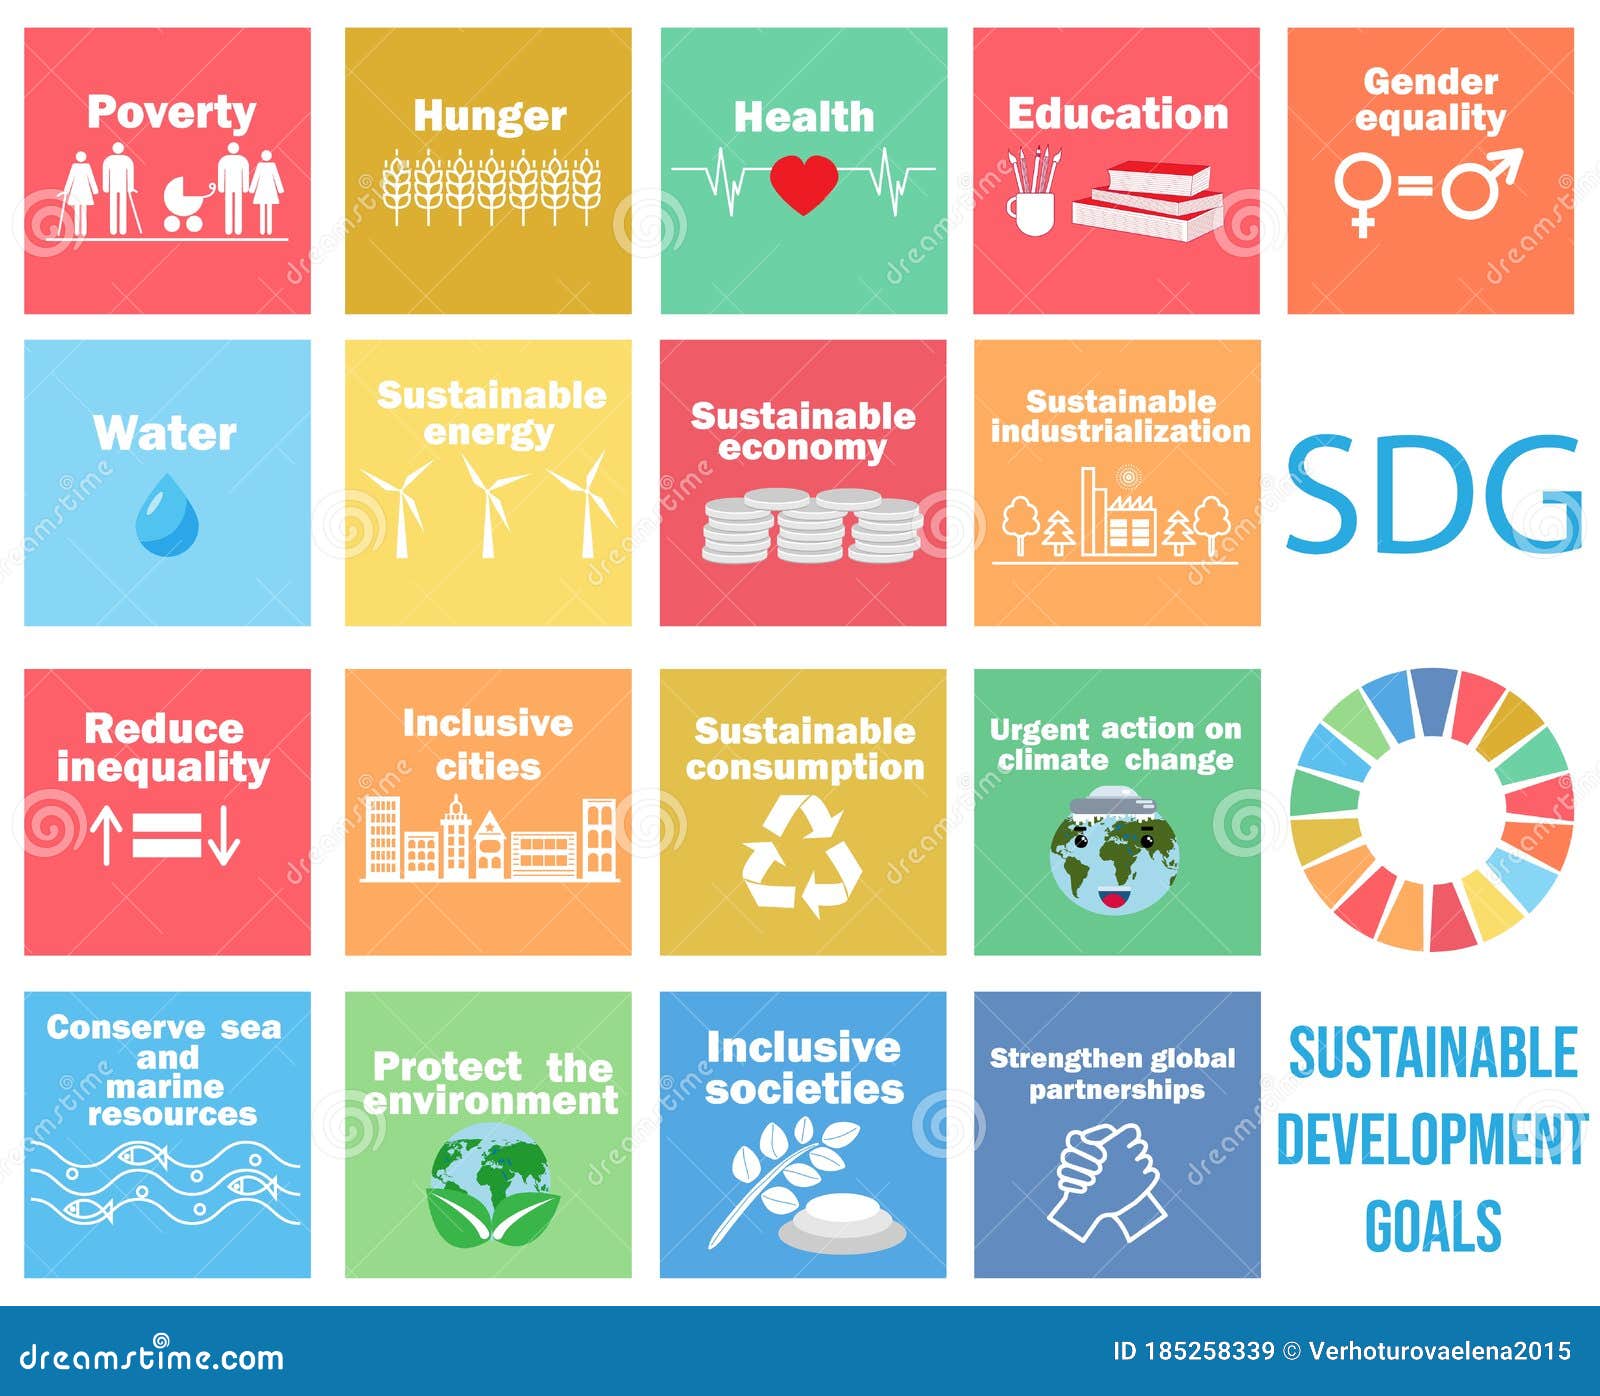 Sustainable Development Goals The United Nations Sdg - vrogue.co